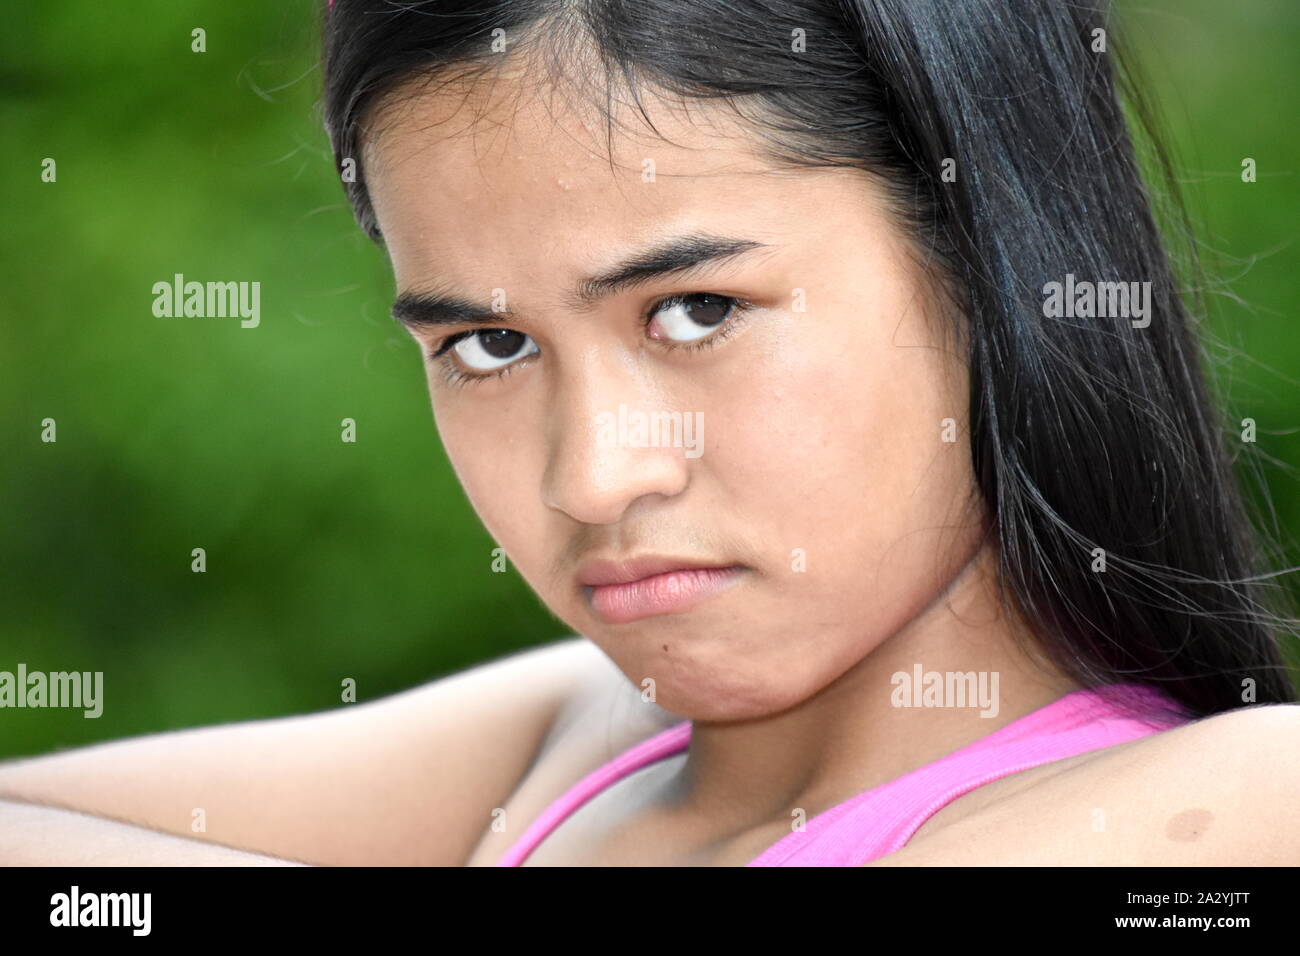 An A Stubborn Youthful Teenager Girl Stock Photo